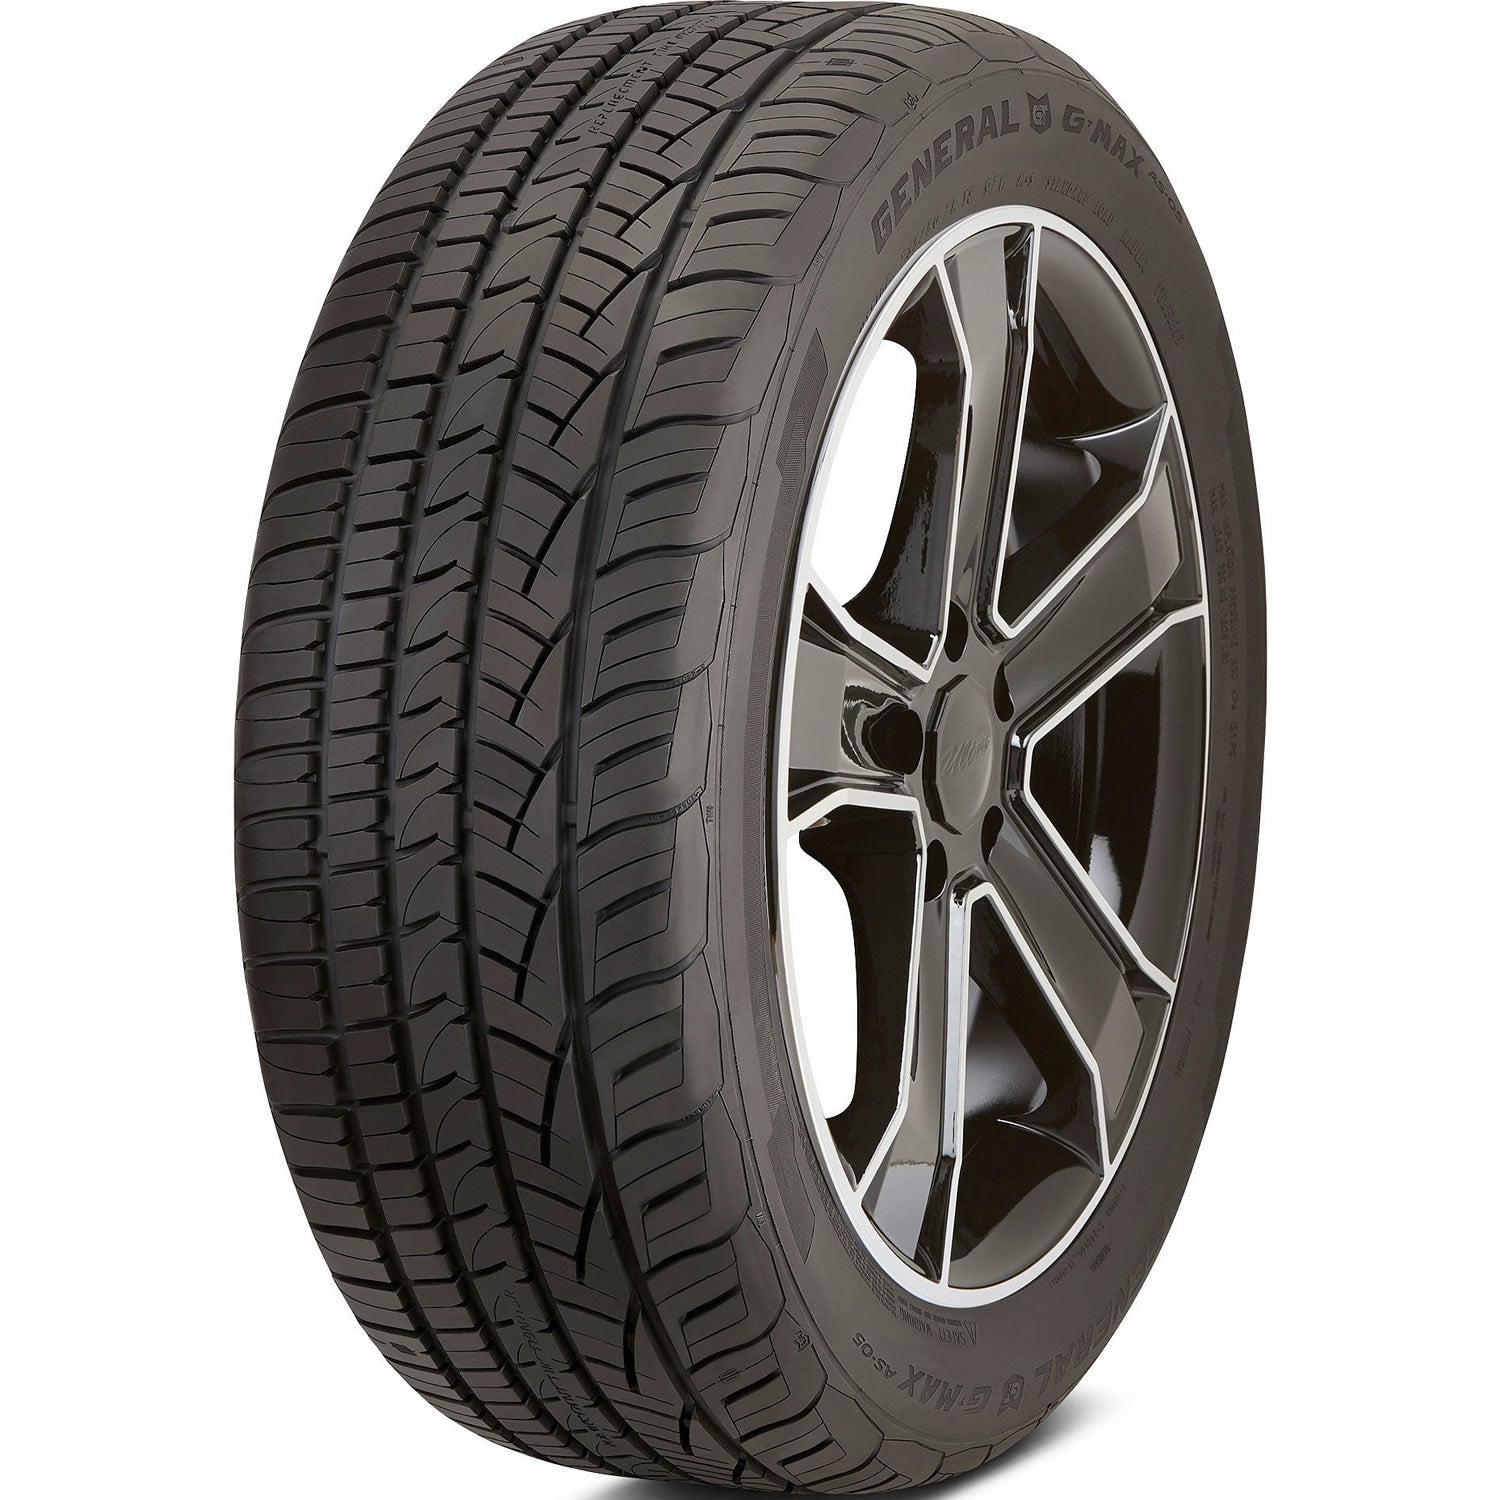 GENERAL G-MAX AS-05 235/40ZR18 (25.4X9.3R 18) Tires